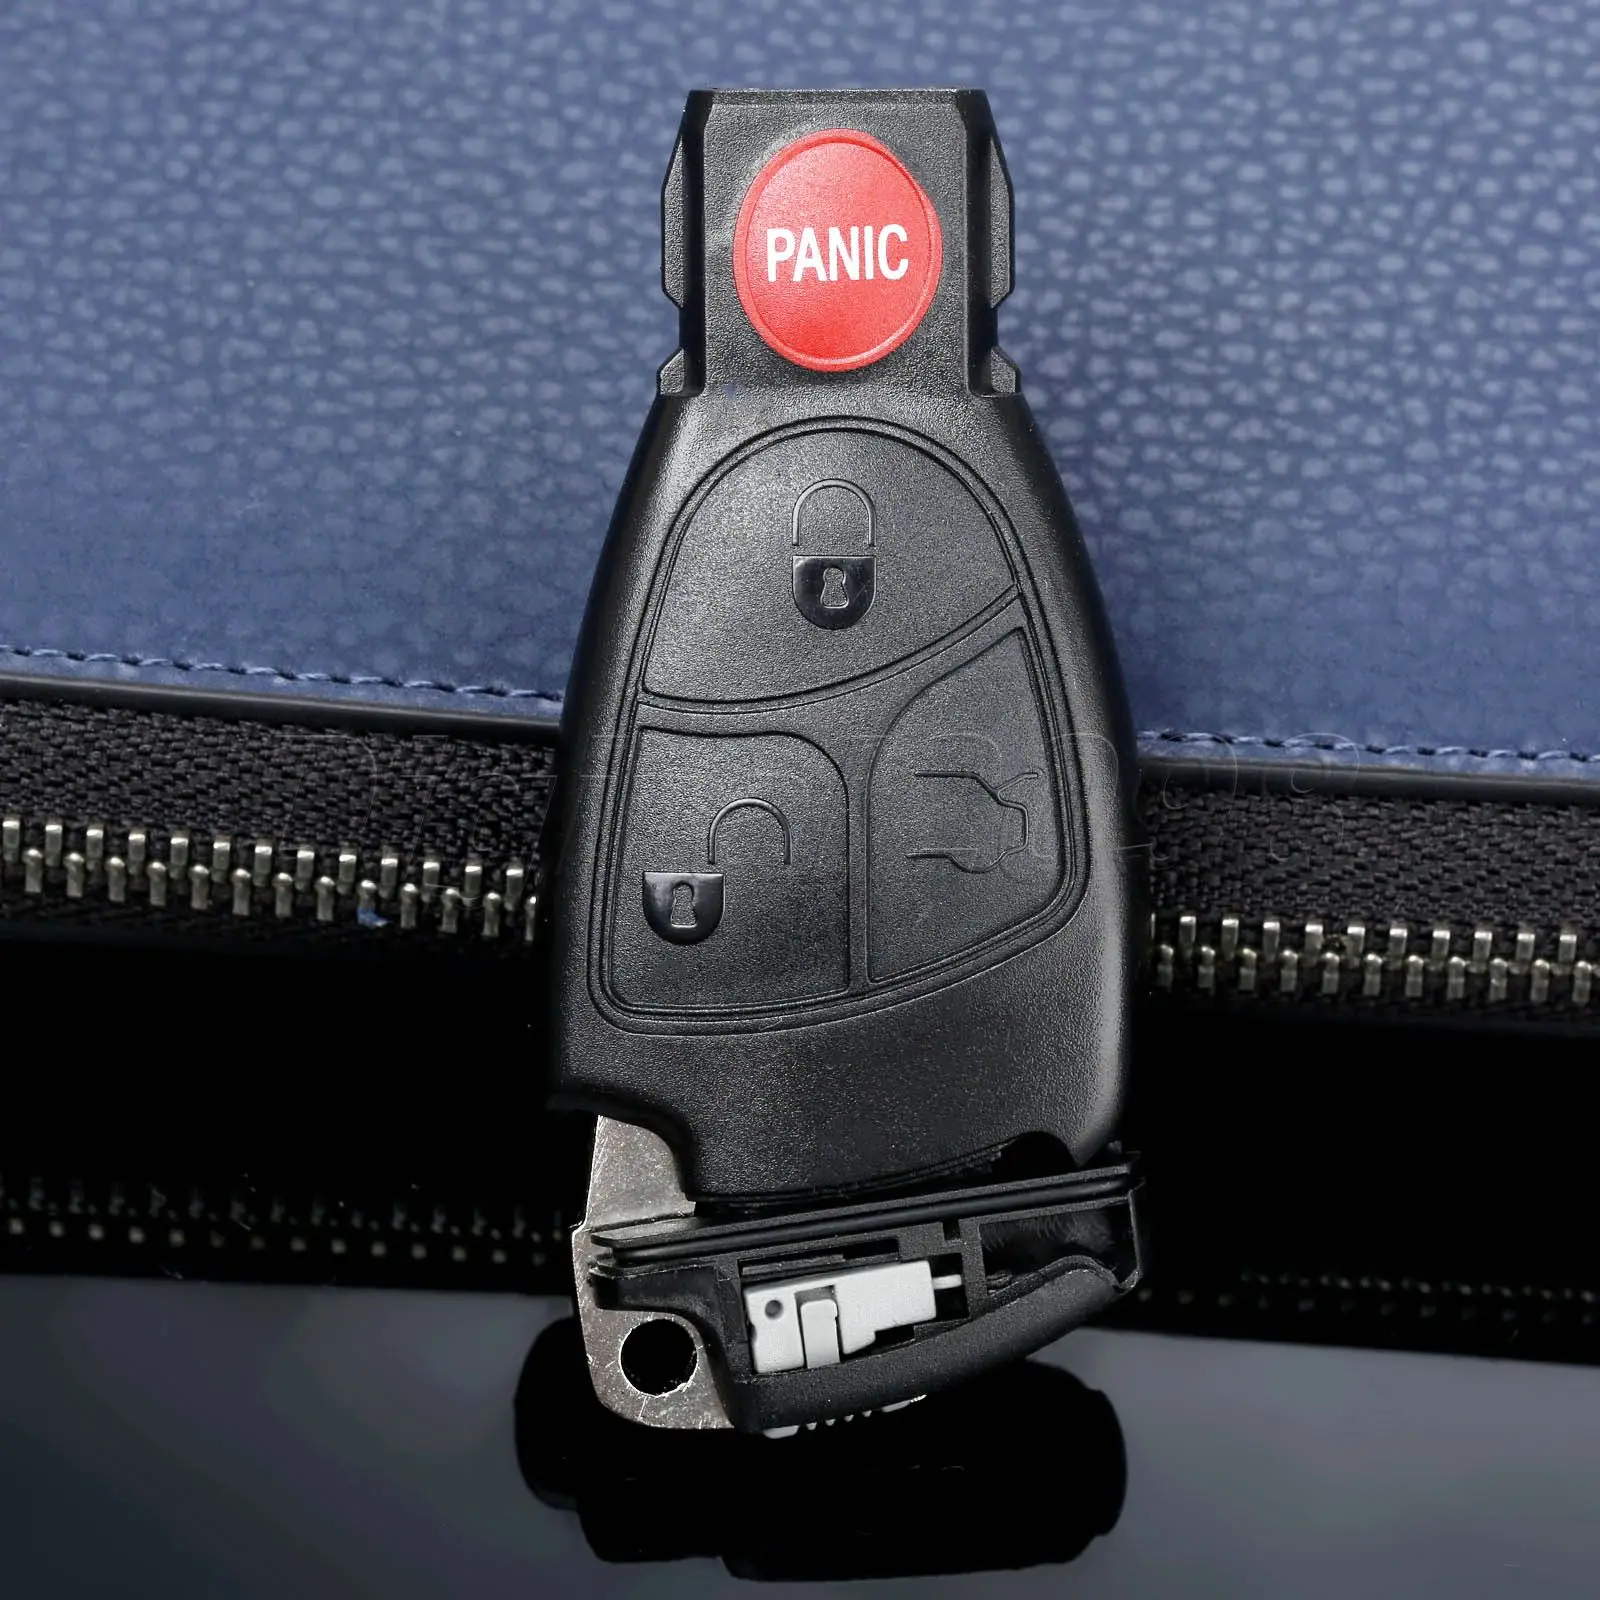 

Yetaha New Replacement Remote Keyless Entry Fob Battery Clip Key Insert Case Shell For Mercedes Benz C230 E C R CL GL SL CLK SLK